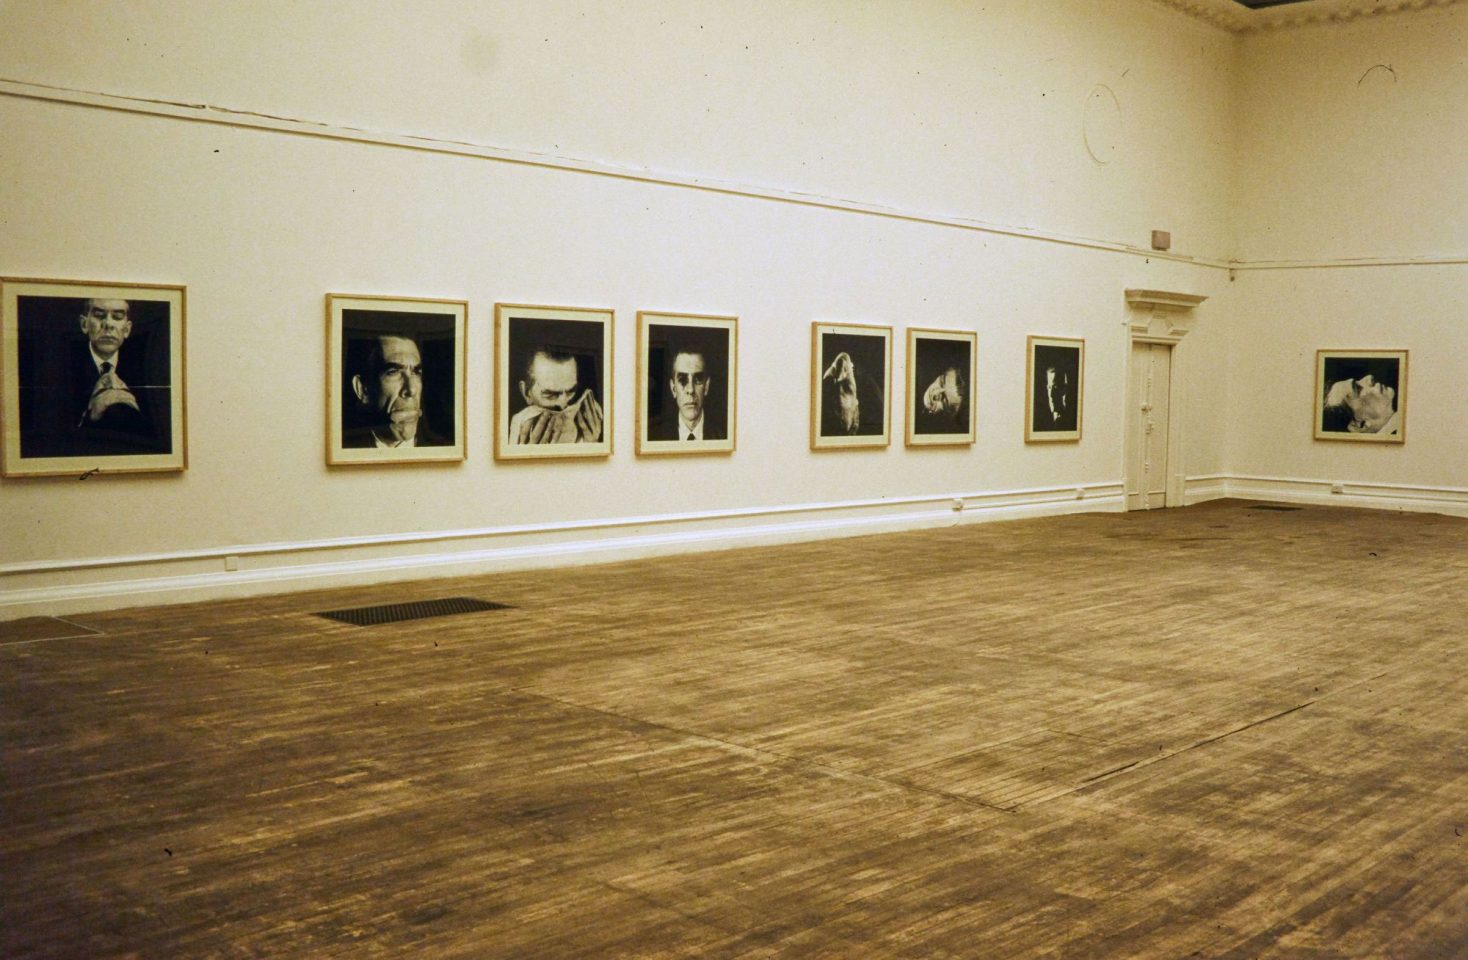 Installation view from Jorge Molder 1998 solo show.
